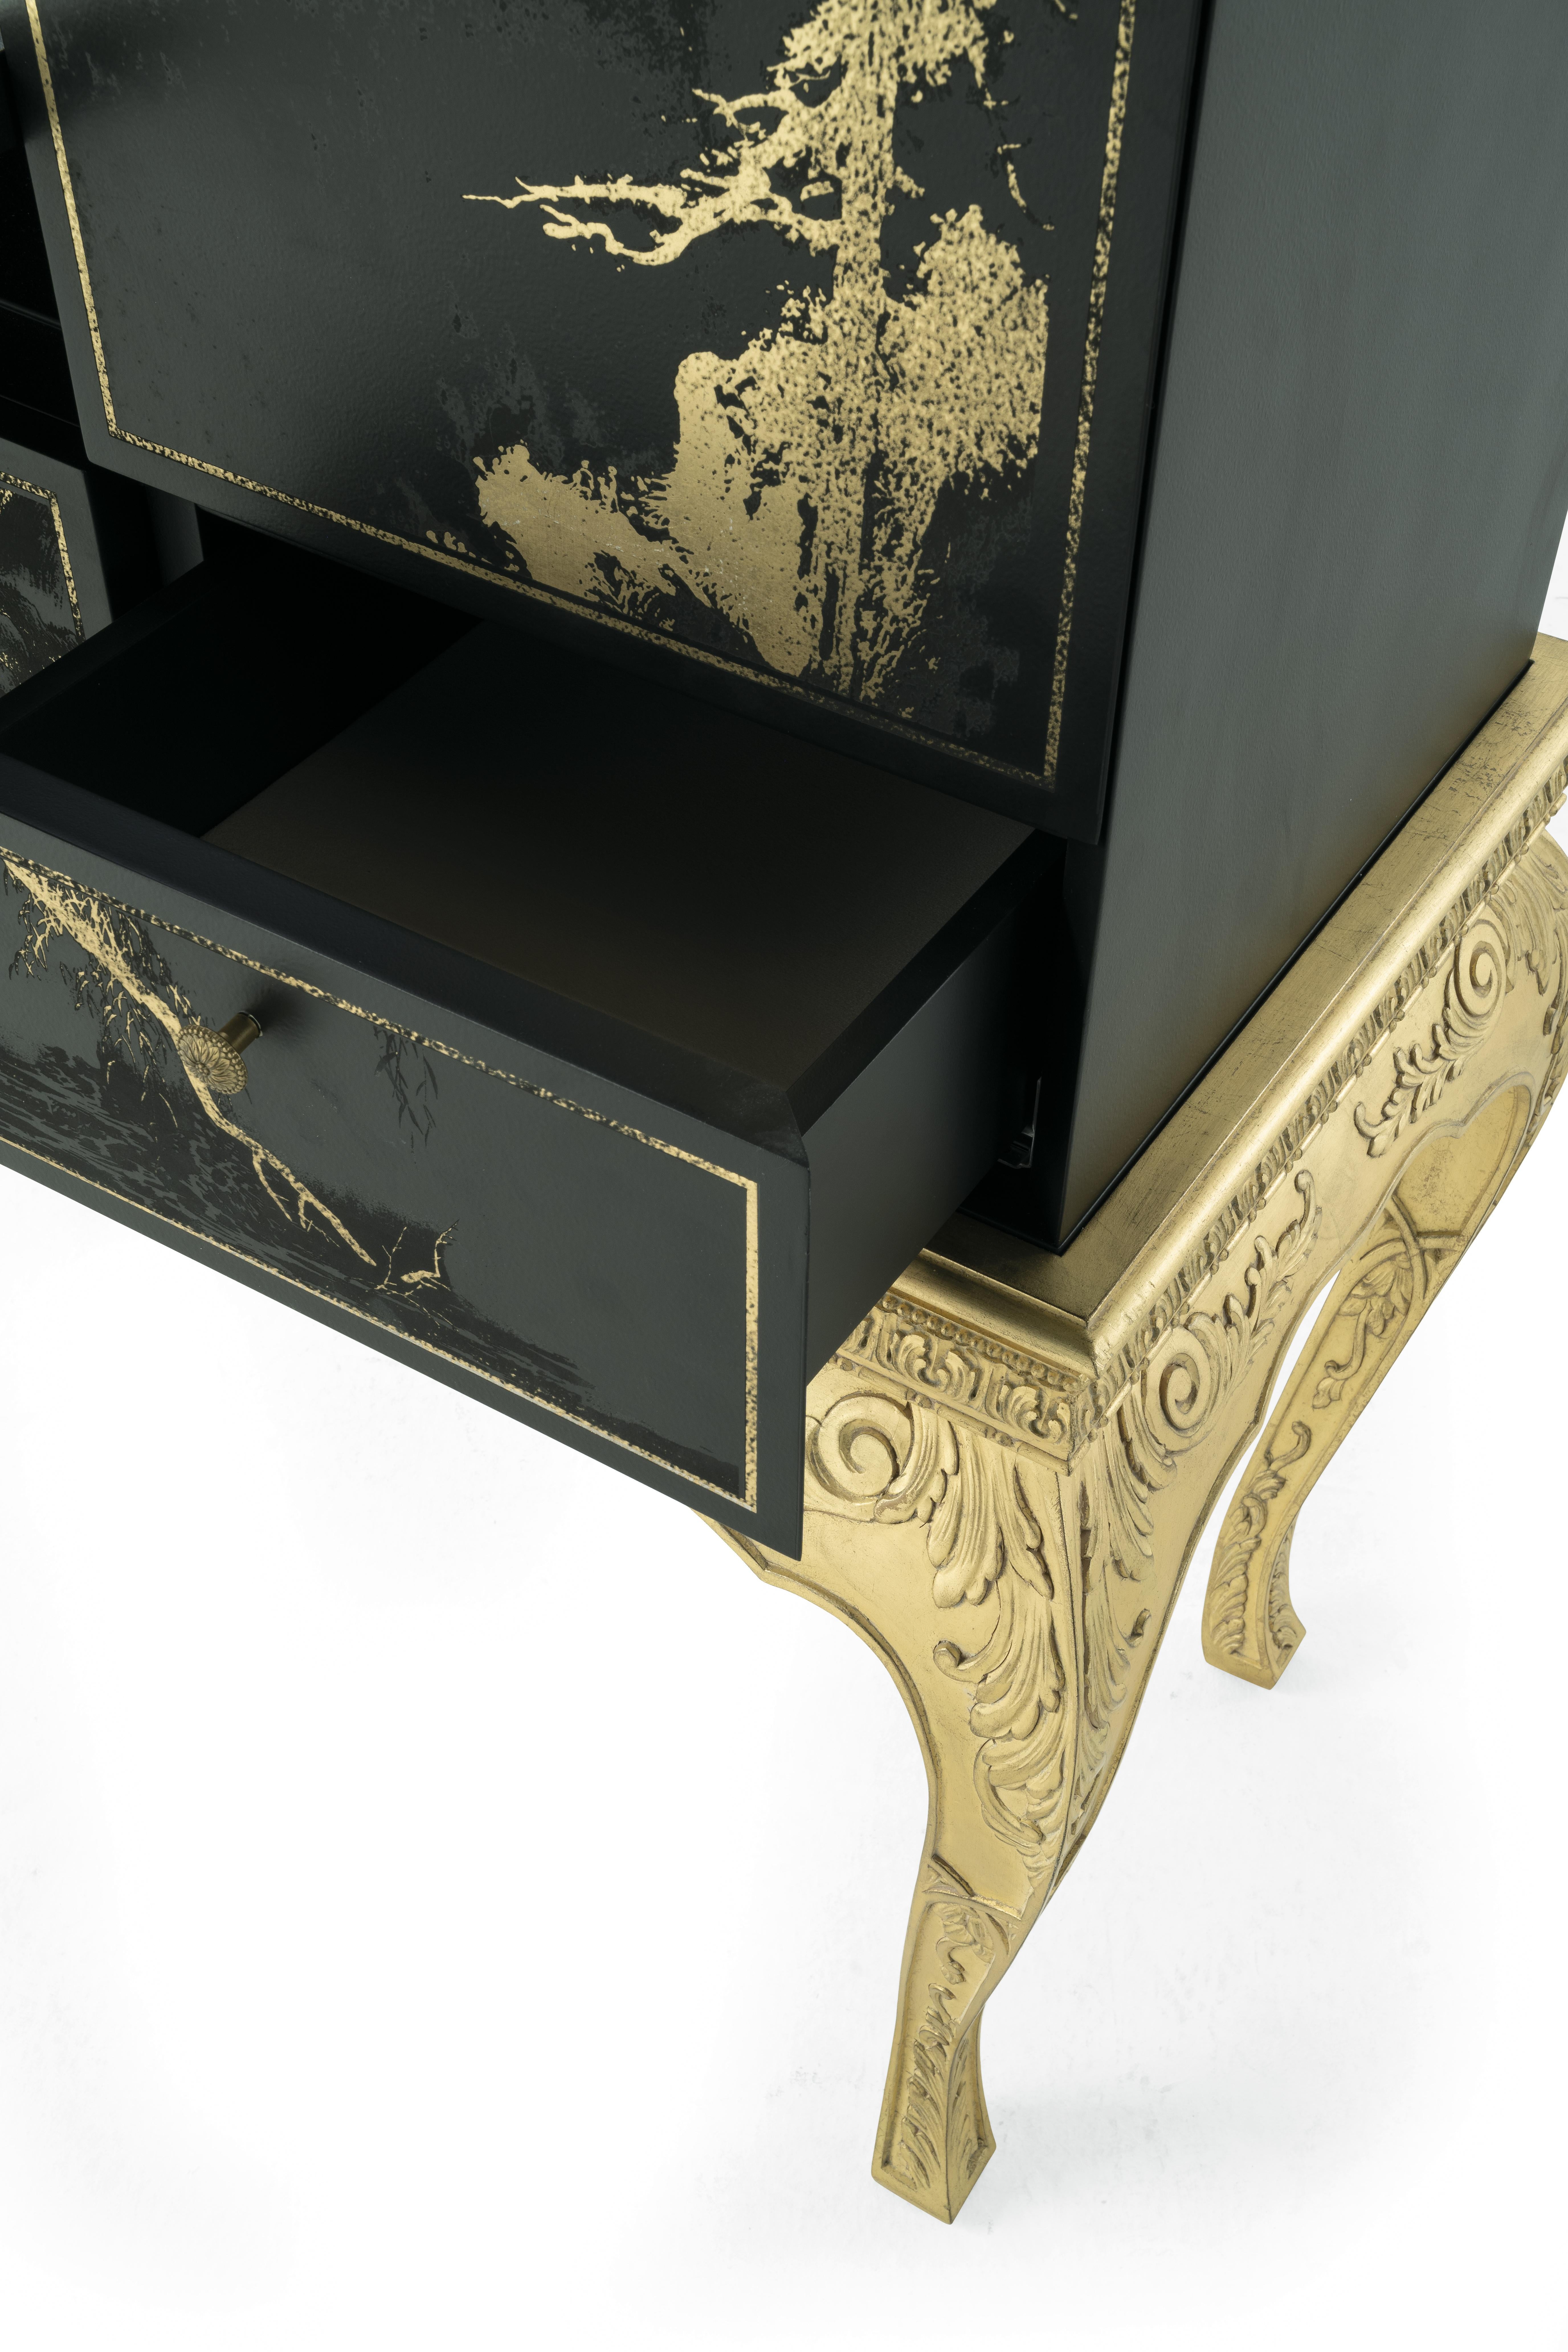 Contemporary 21st Century Brocart Bar Cabinet with Gold Leaf Laser Engraved Lace Decoration For Sale